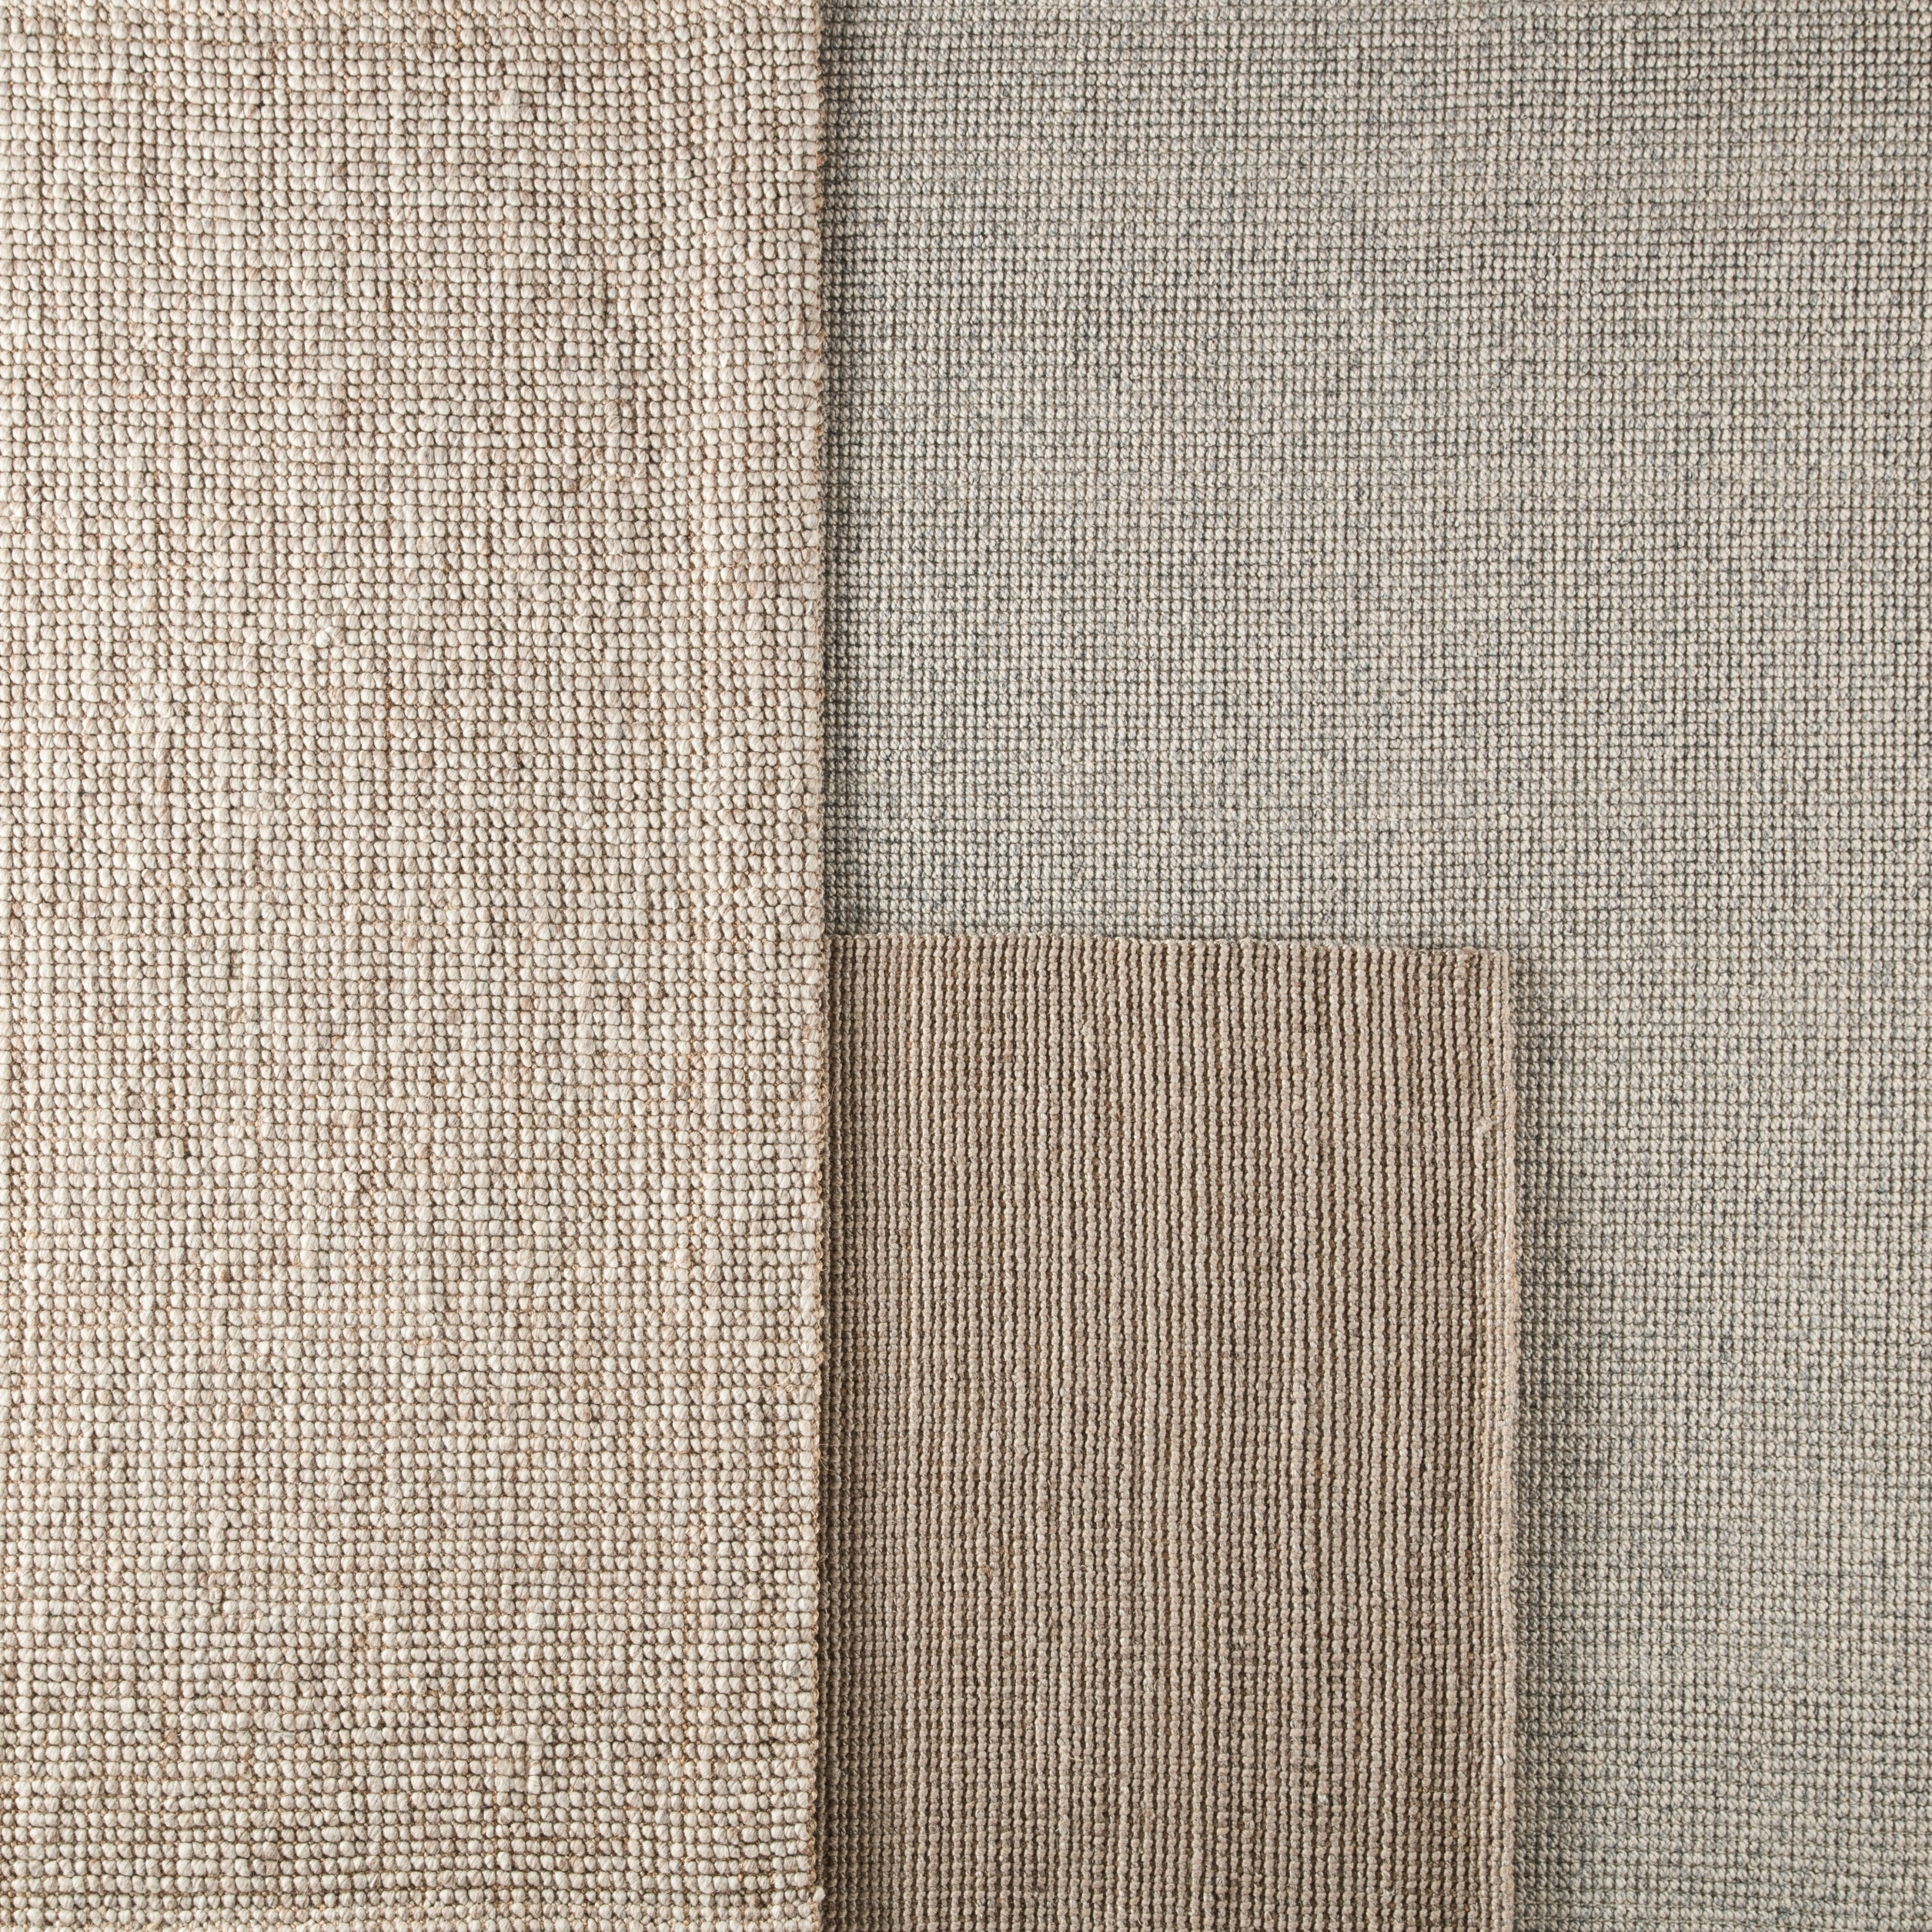 Beech Natural Solid Tan/ Taupe Area Rug (8'X10') - Image 5